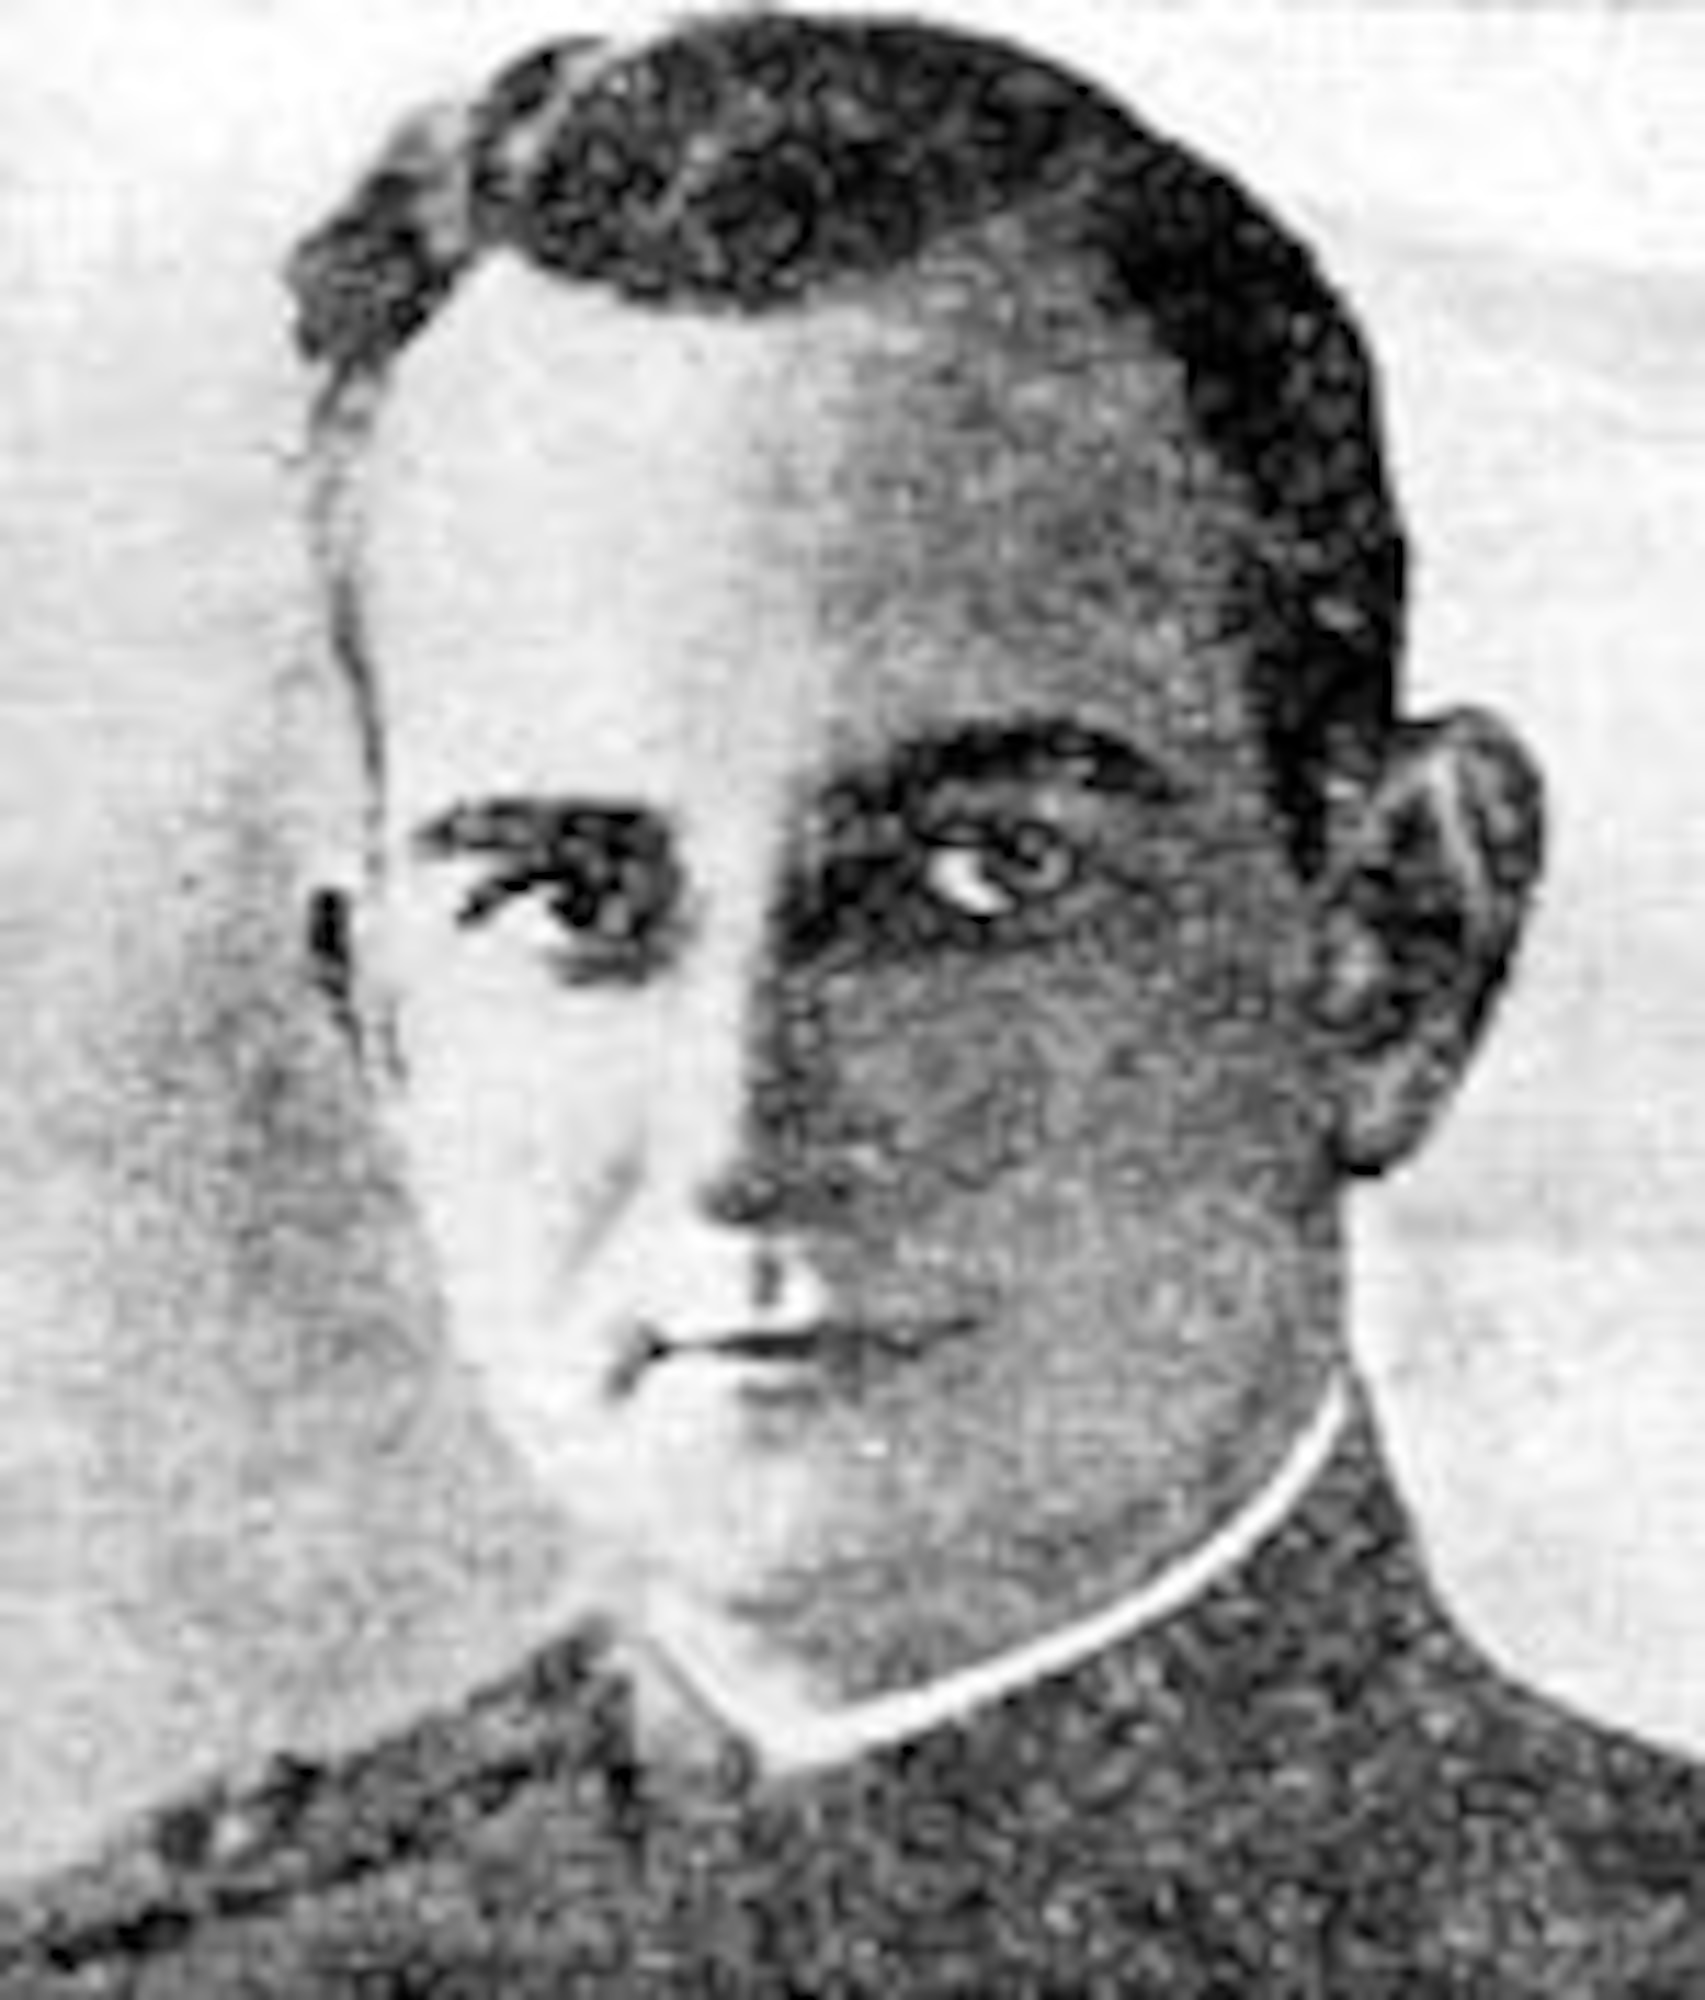 Pictured is Capt. Dale Mabry. Mabry died piloting the Army airship Roma when it crashed during a test flight on 21 Feb., 1922. The crash claimed 34 lives. (Courtesy photo)